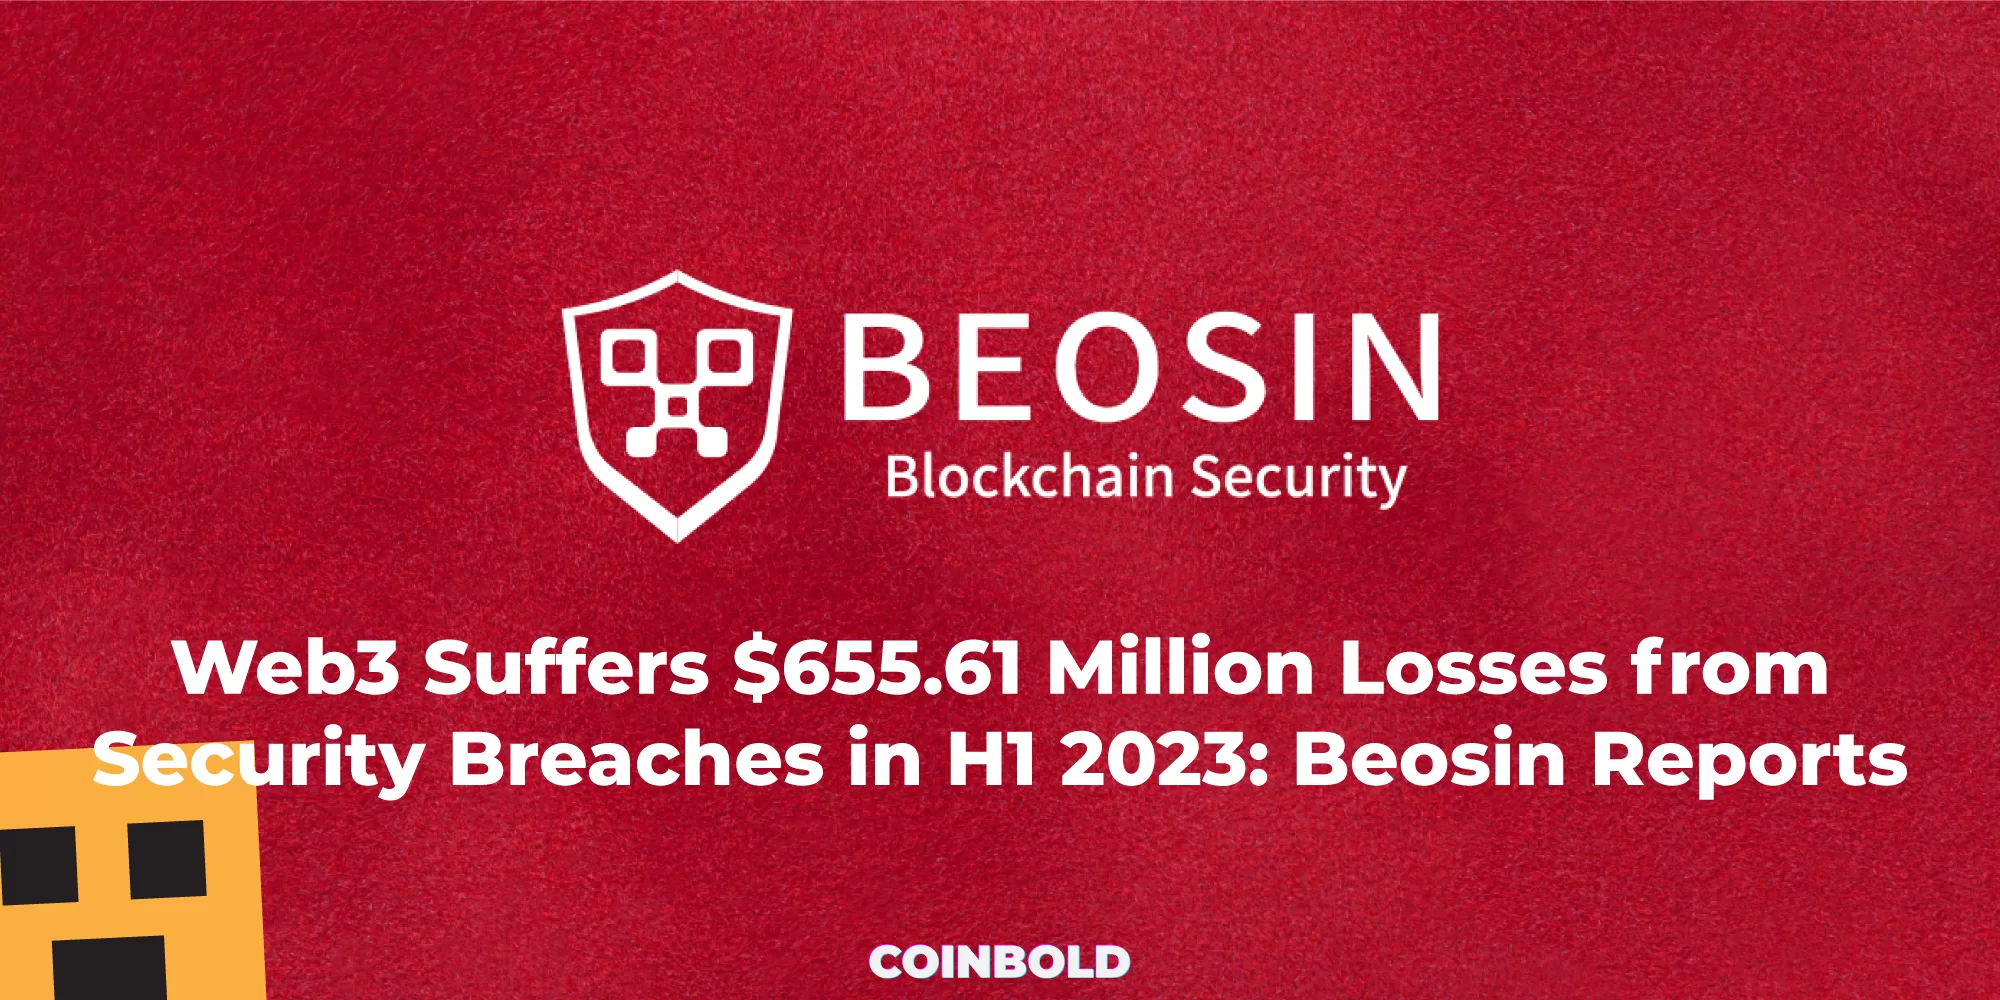 Web3 Suffers $655.61 Million Losses from Security Breaches in H1 2023: Beosin Reports